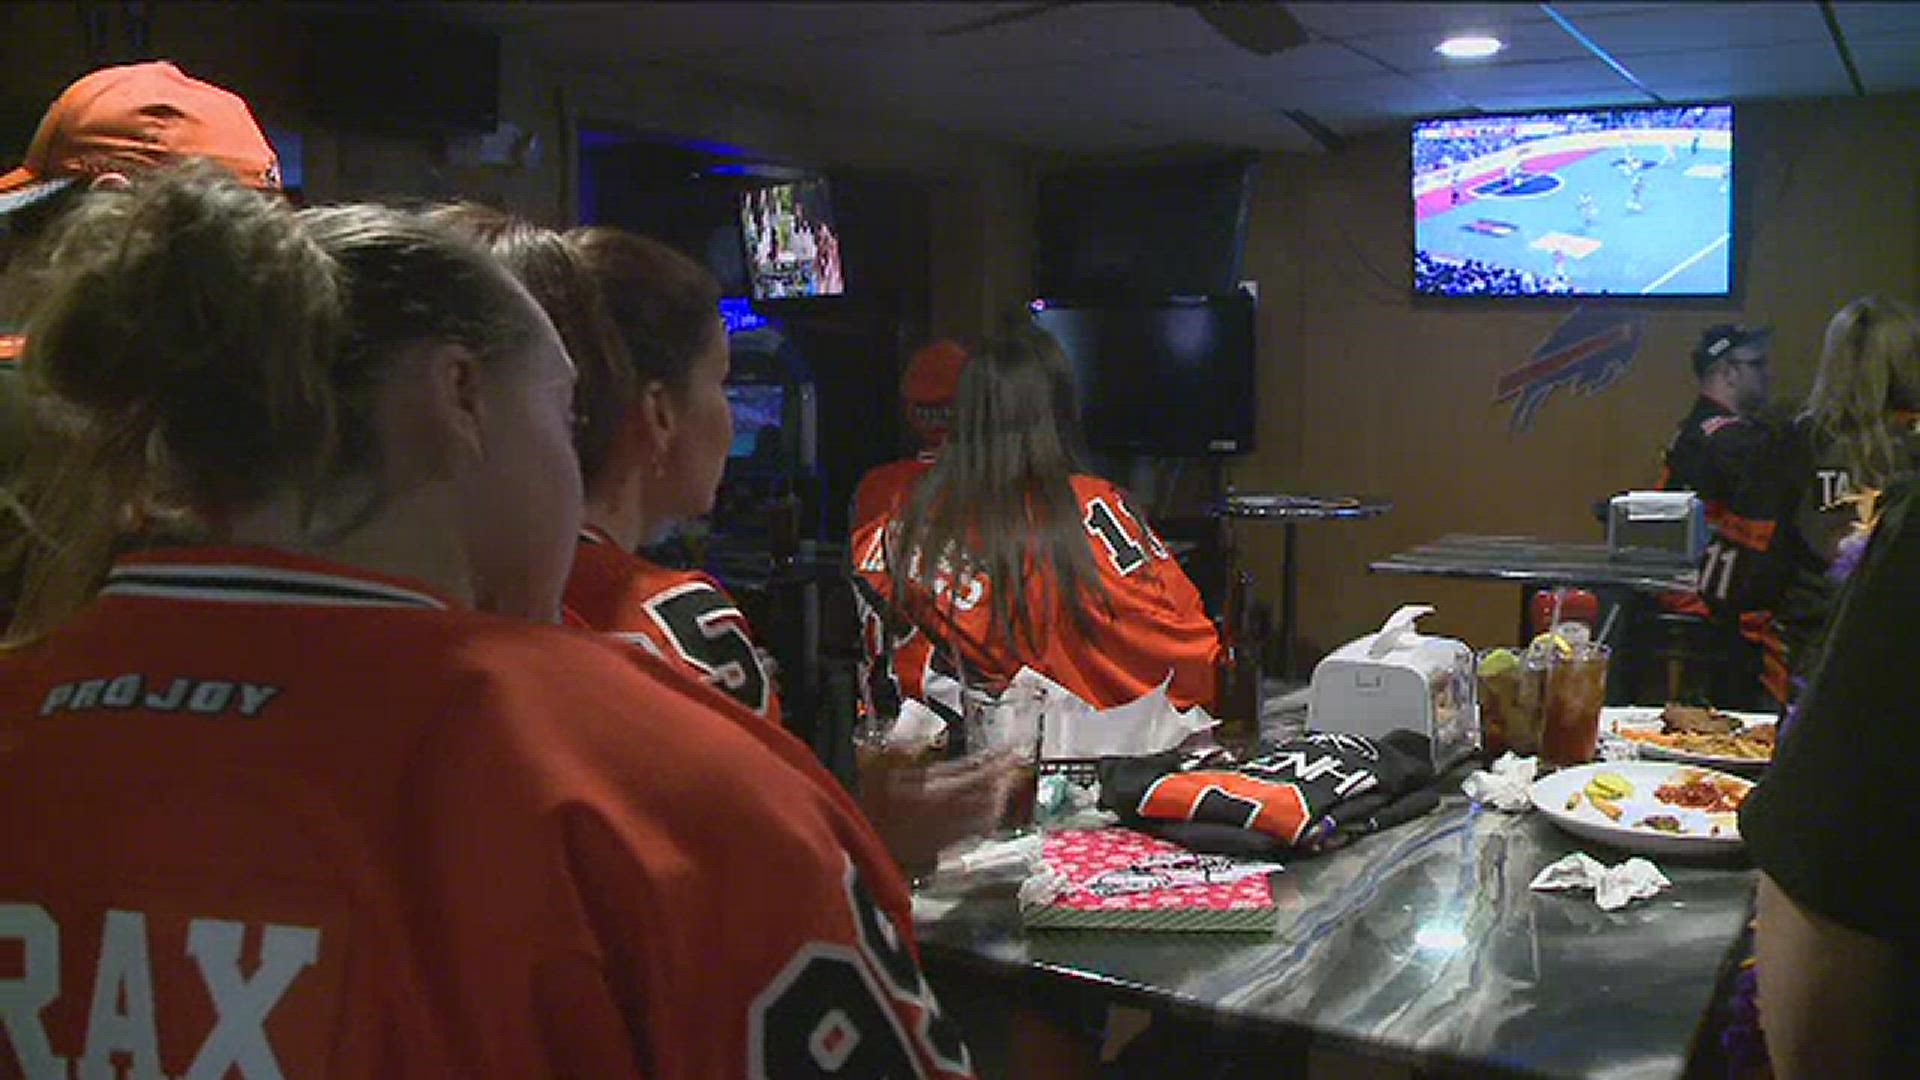 There was a watch party Saturday night at Witter's Sports Bar and Grill in North Tonawanda. Witter's has held watch parties for every road game since February.